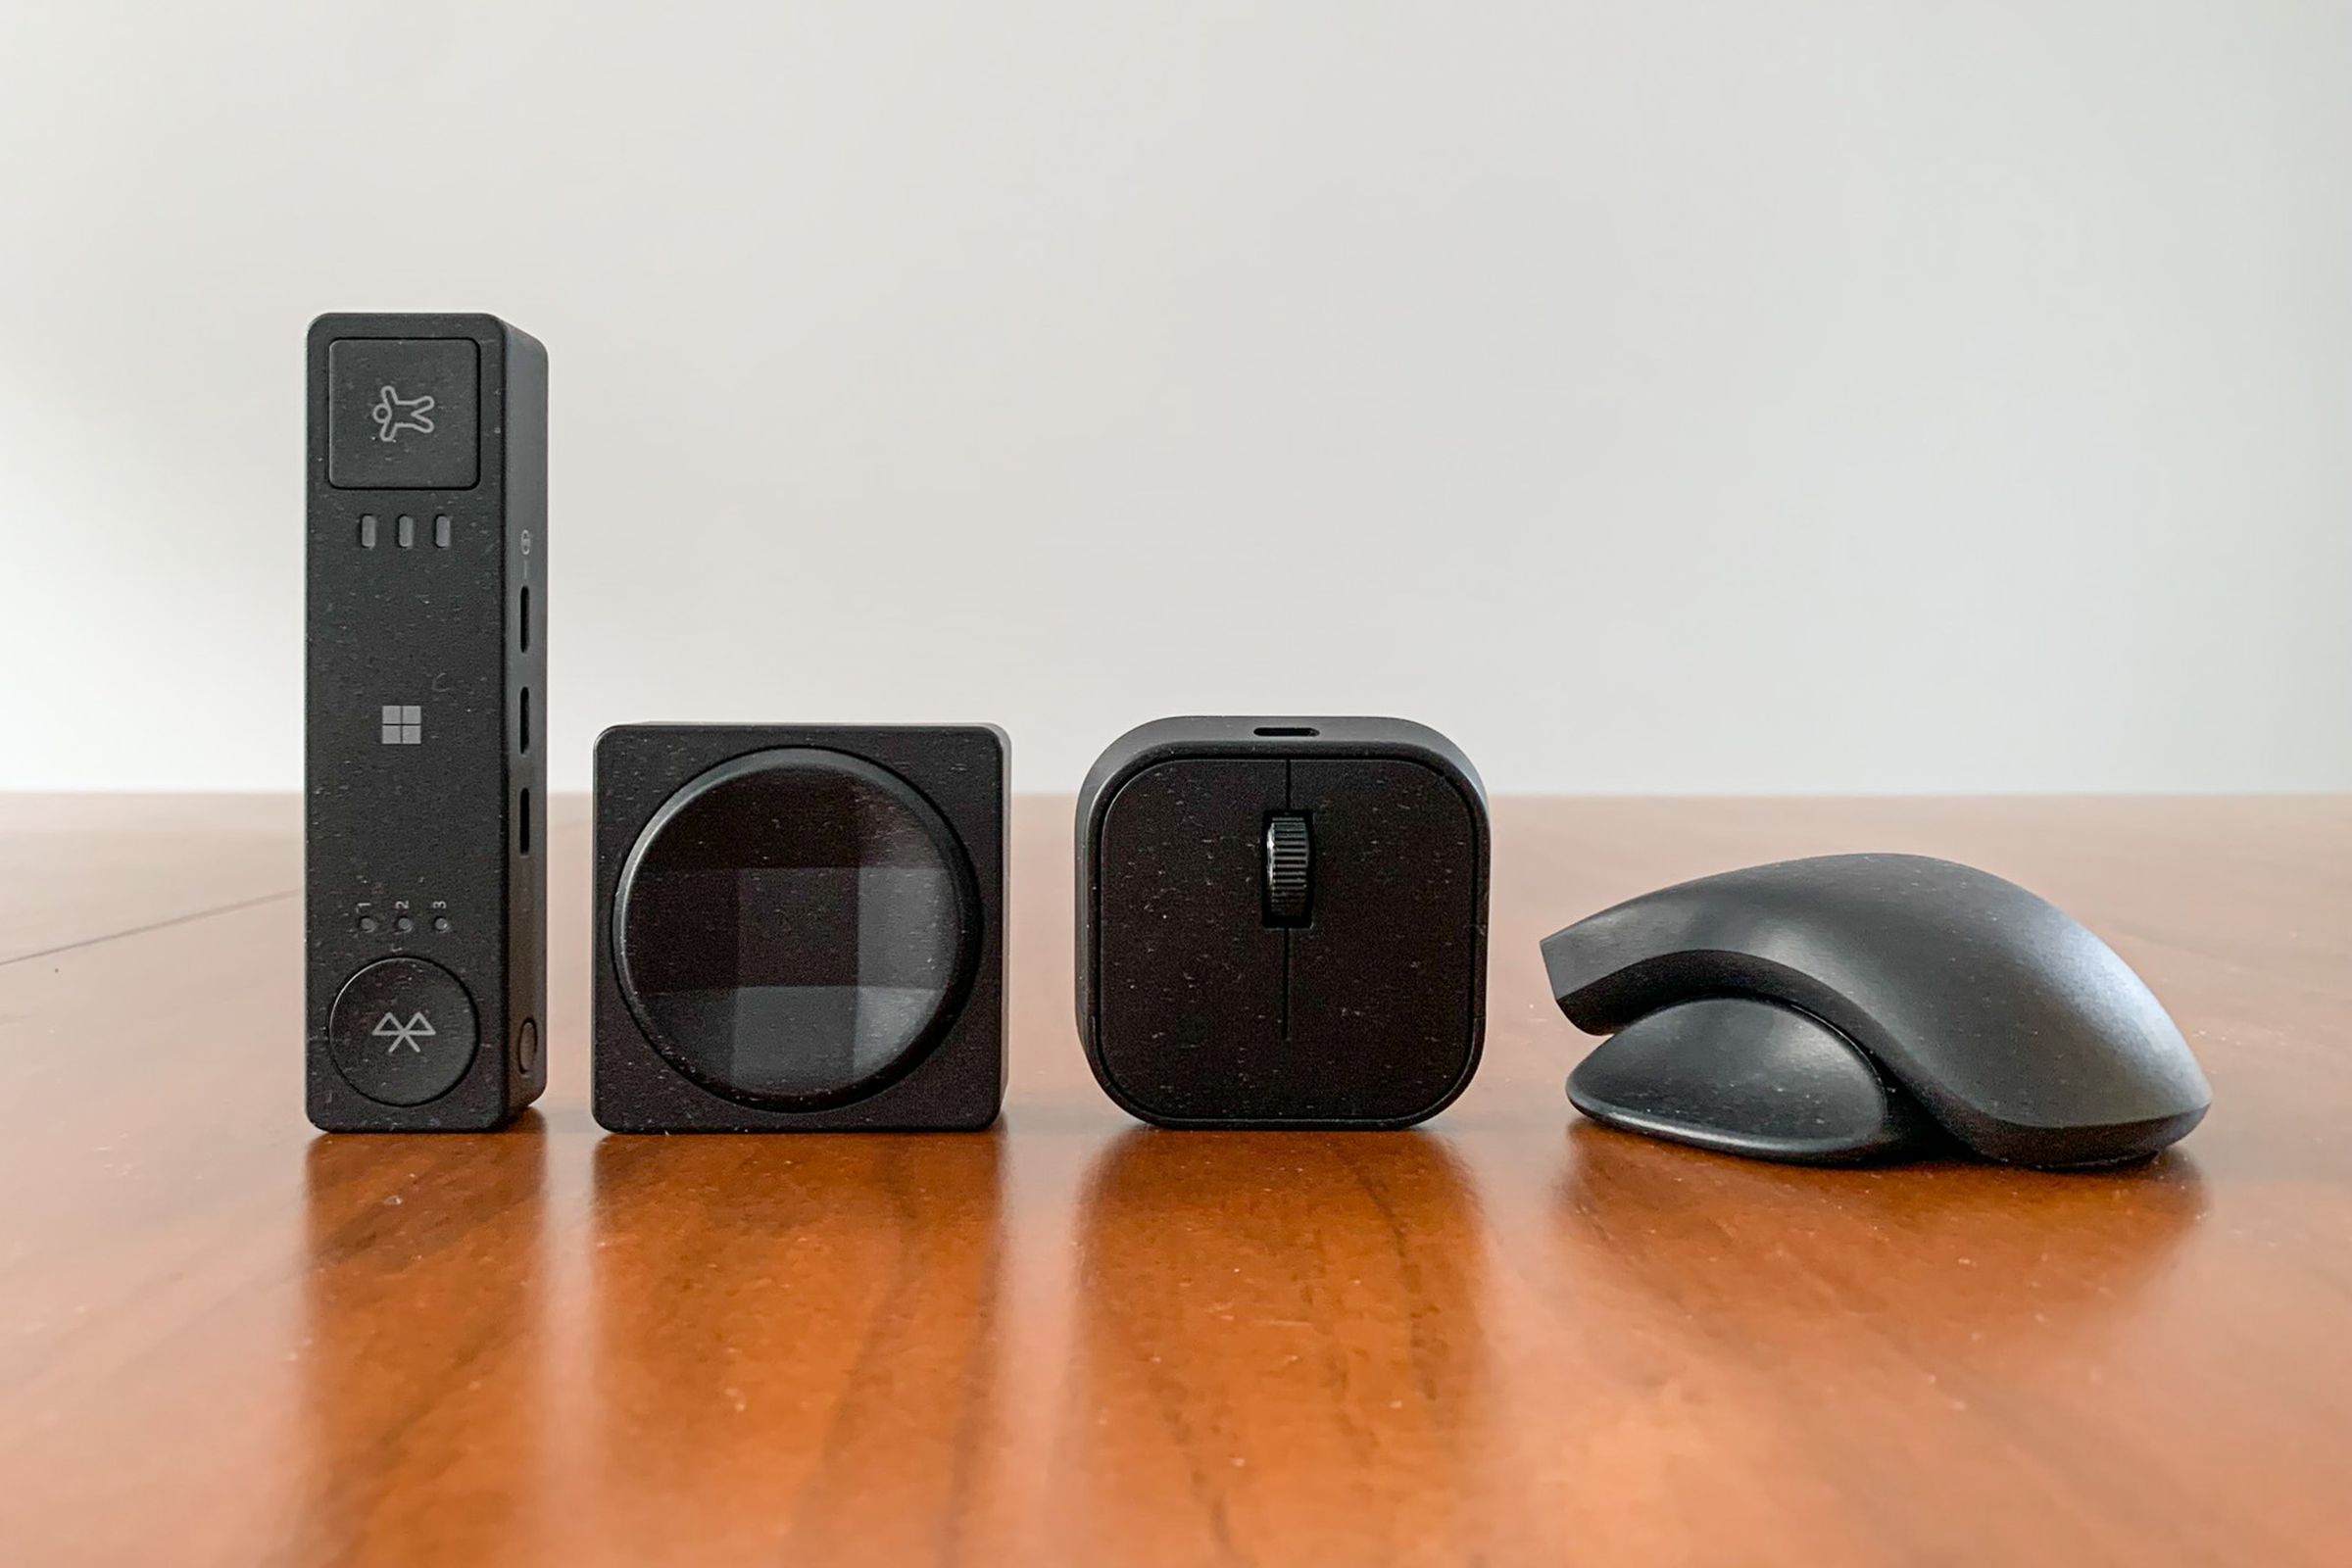 Lineup of Microsoft’s Adaptive Hub, Adaptive D-pad Button (both sides), and Adaptive Mouse with Adaptive Mouse Tail and Thumb Support.